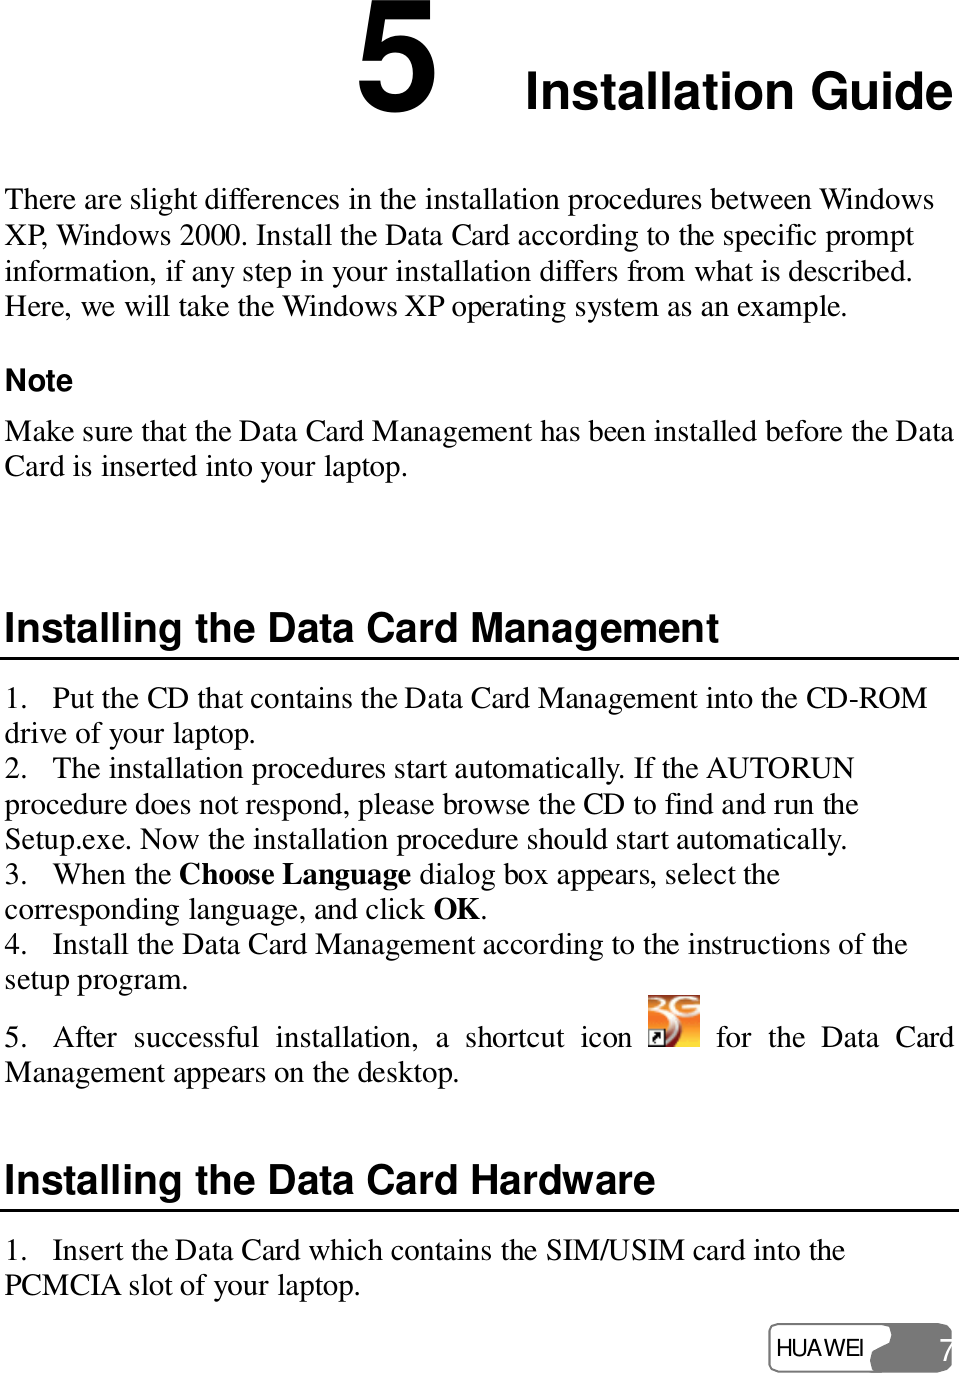  HUAWEI  7 5  Installation Guide There are slight differences in the installation procedures between Windows XP, Windows 2000. Install the Data Card according to the specific prompt information, if any step in your installation differs from what is described. Here, we will take the Windows XP operating system as an example. Note  Make sure that the Data Card Management has been installed before the Data Card is inserted into your laptop.  Installing the Data Card Management 1. Put the CD that contains the Data Card Management into the CD-ROM drive of your laptop. 2. The installation procedures start automatically. If the AUTORUN procedure does not respond, please browse the CD to find and run the Setup.exe. Now the installation procedure should start automatically. 3. When the Choose Language dialog box appears, select the corresponding language, and click OK. 4. Install the Data Card Management according to the instructions of the setup program. 5. After successful installation, a shortcut icon   for the Data Card Management appears on the desktop. Installing the Data Card Hardware 1. Insert the Data Card which contains the SIM/USIM card into the PCMCIA slot of your laptop. 